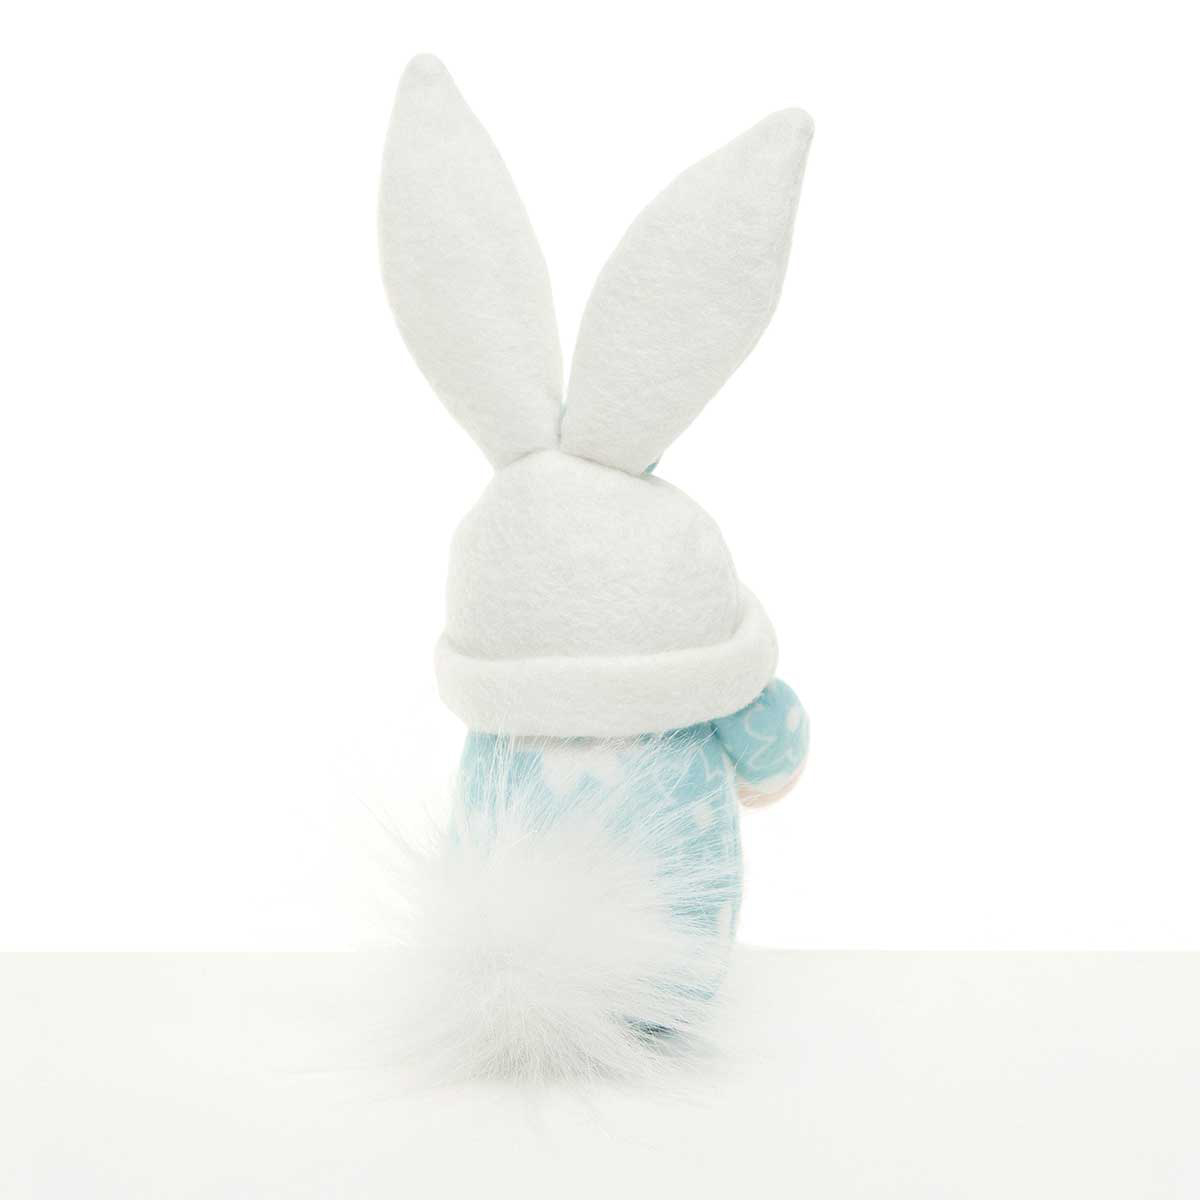 b70 GNOME EASTER BUNNY WITH EGG S 2.25IN X 3.75IN X 6.5IN BLUE/W